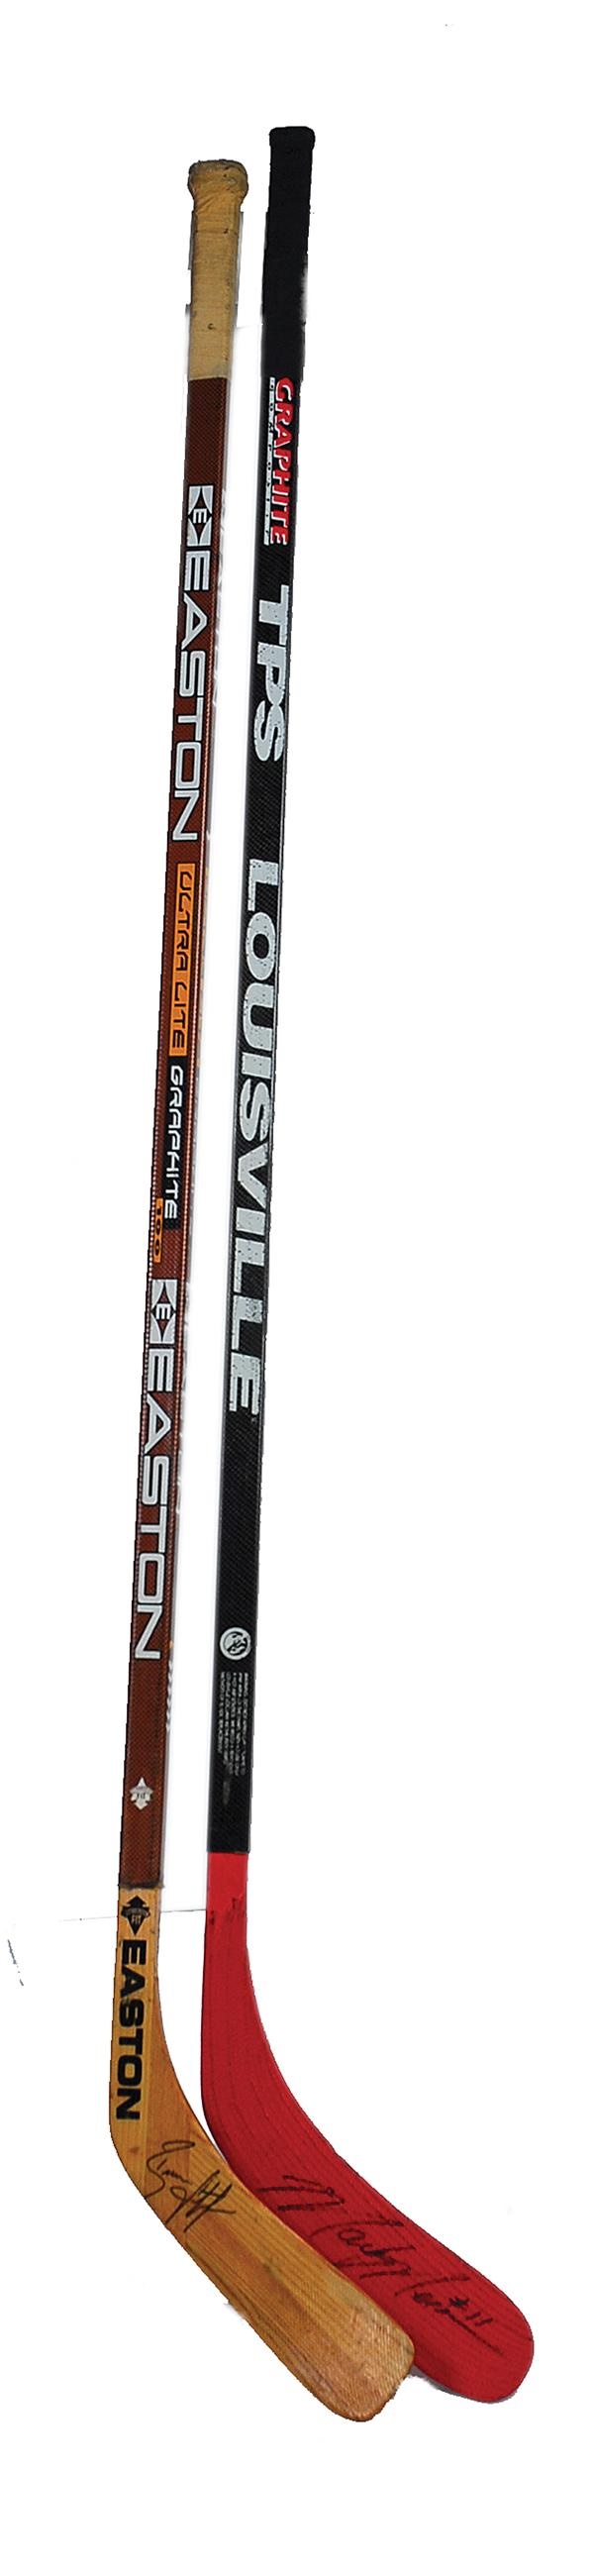 - Brian Leetch and Mark Messier Signed Game Used Sticks